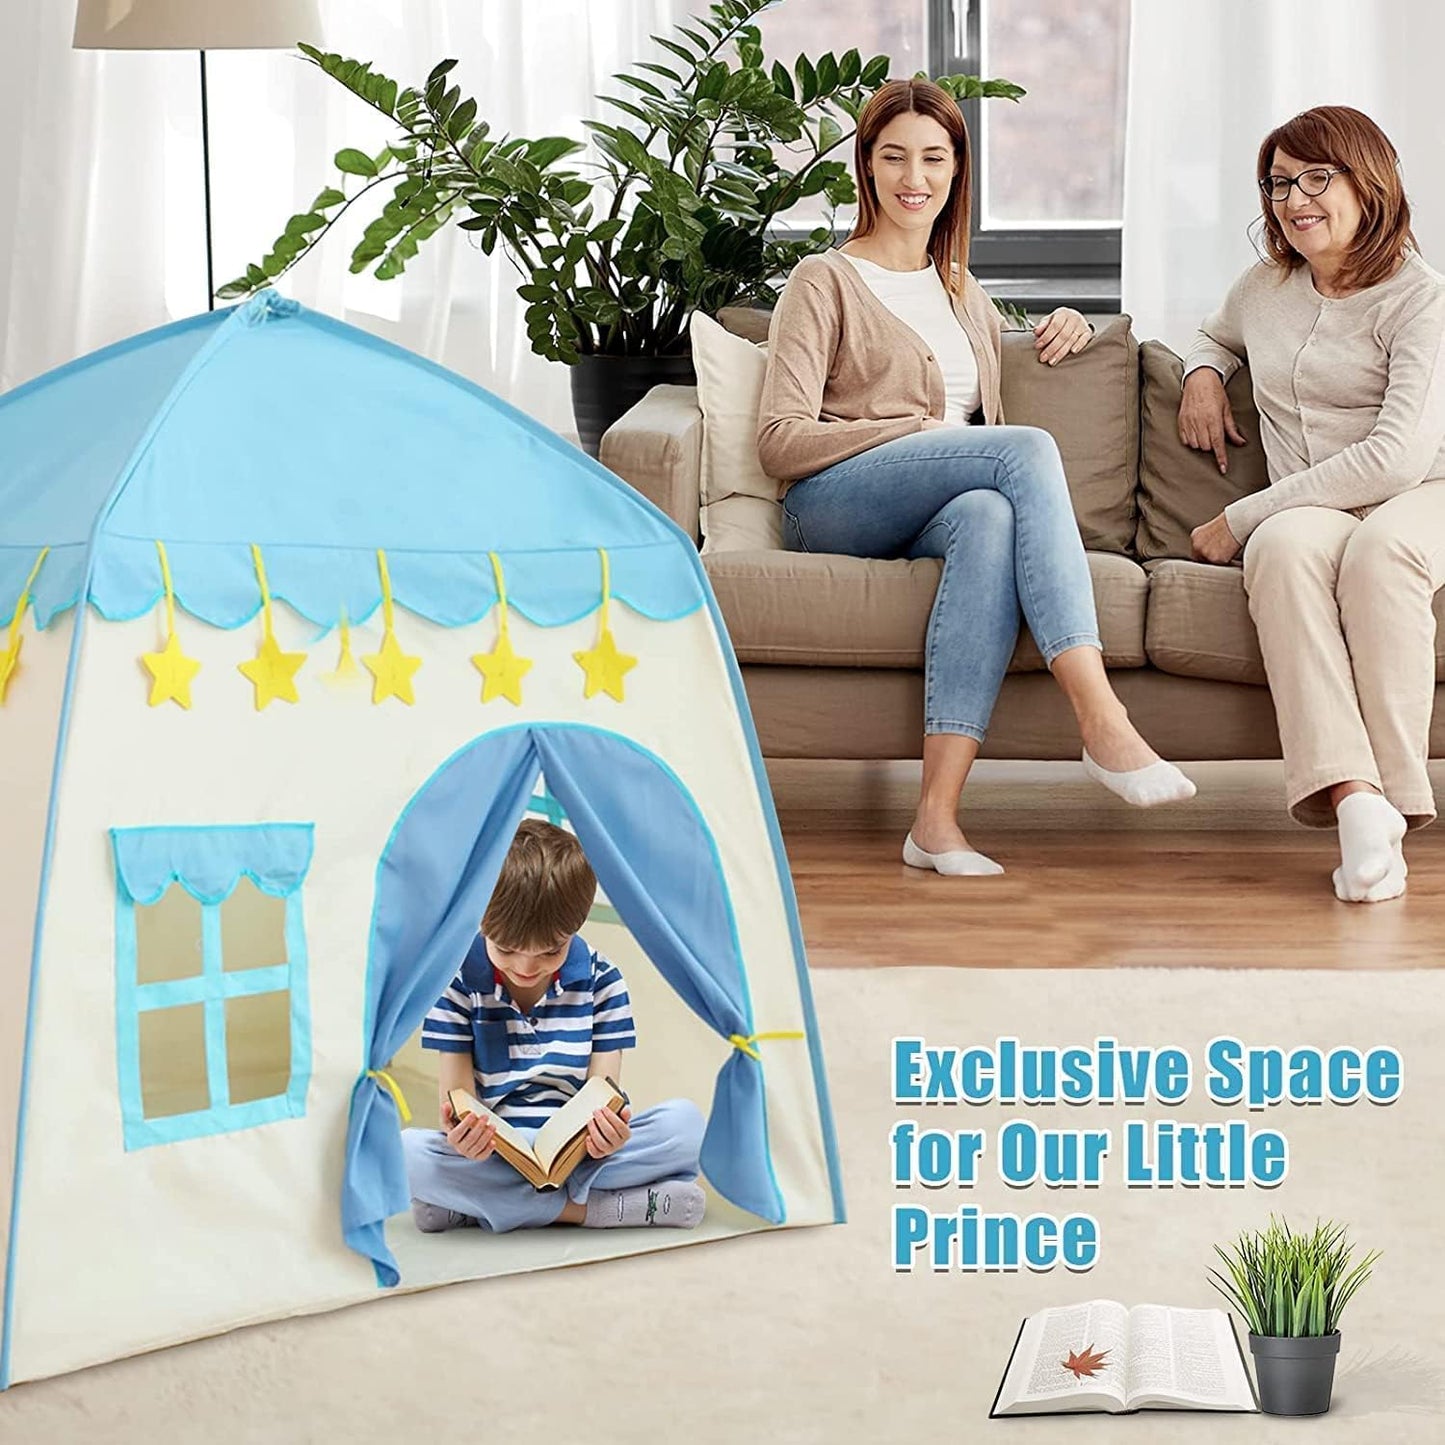 2023 KUSARKO Castle Play Tent for Kids, Playhouse Tent for Girls & Boys-Indoor and Outdoor Play Tent for Kids, Imaginative Gift for Toddlers & Children 3+ Years Old (Light blue)